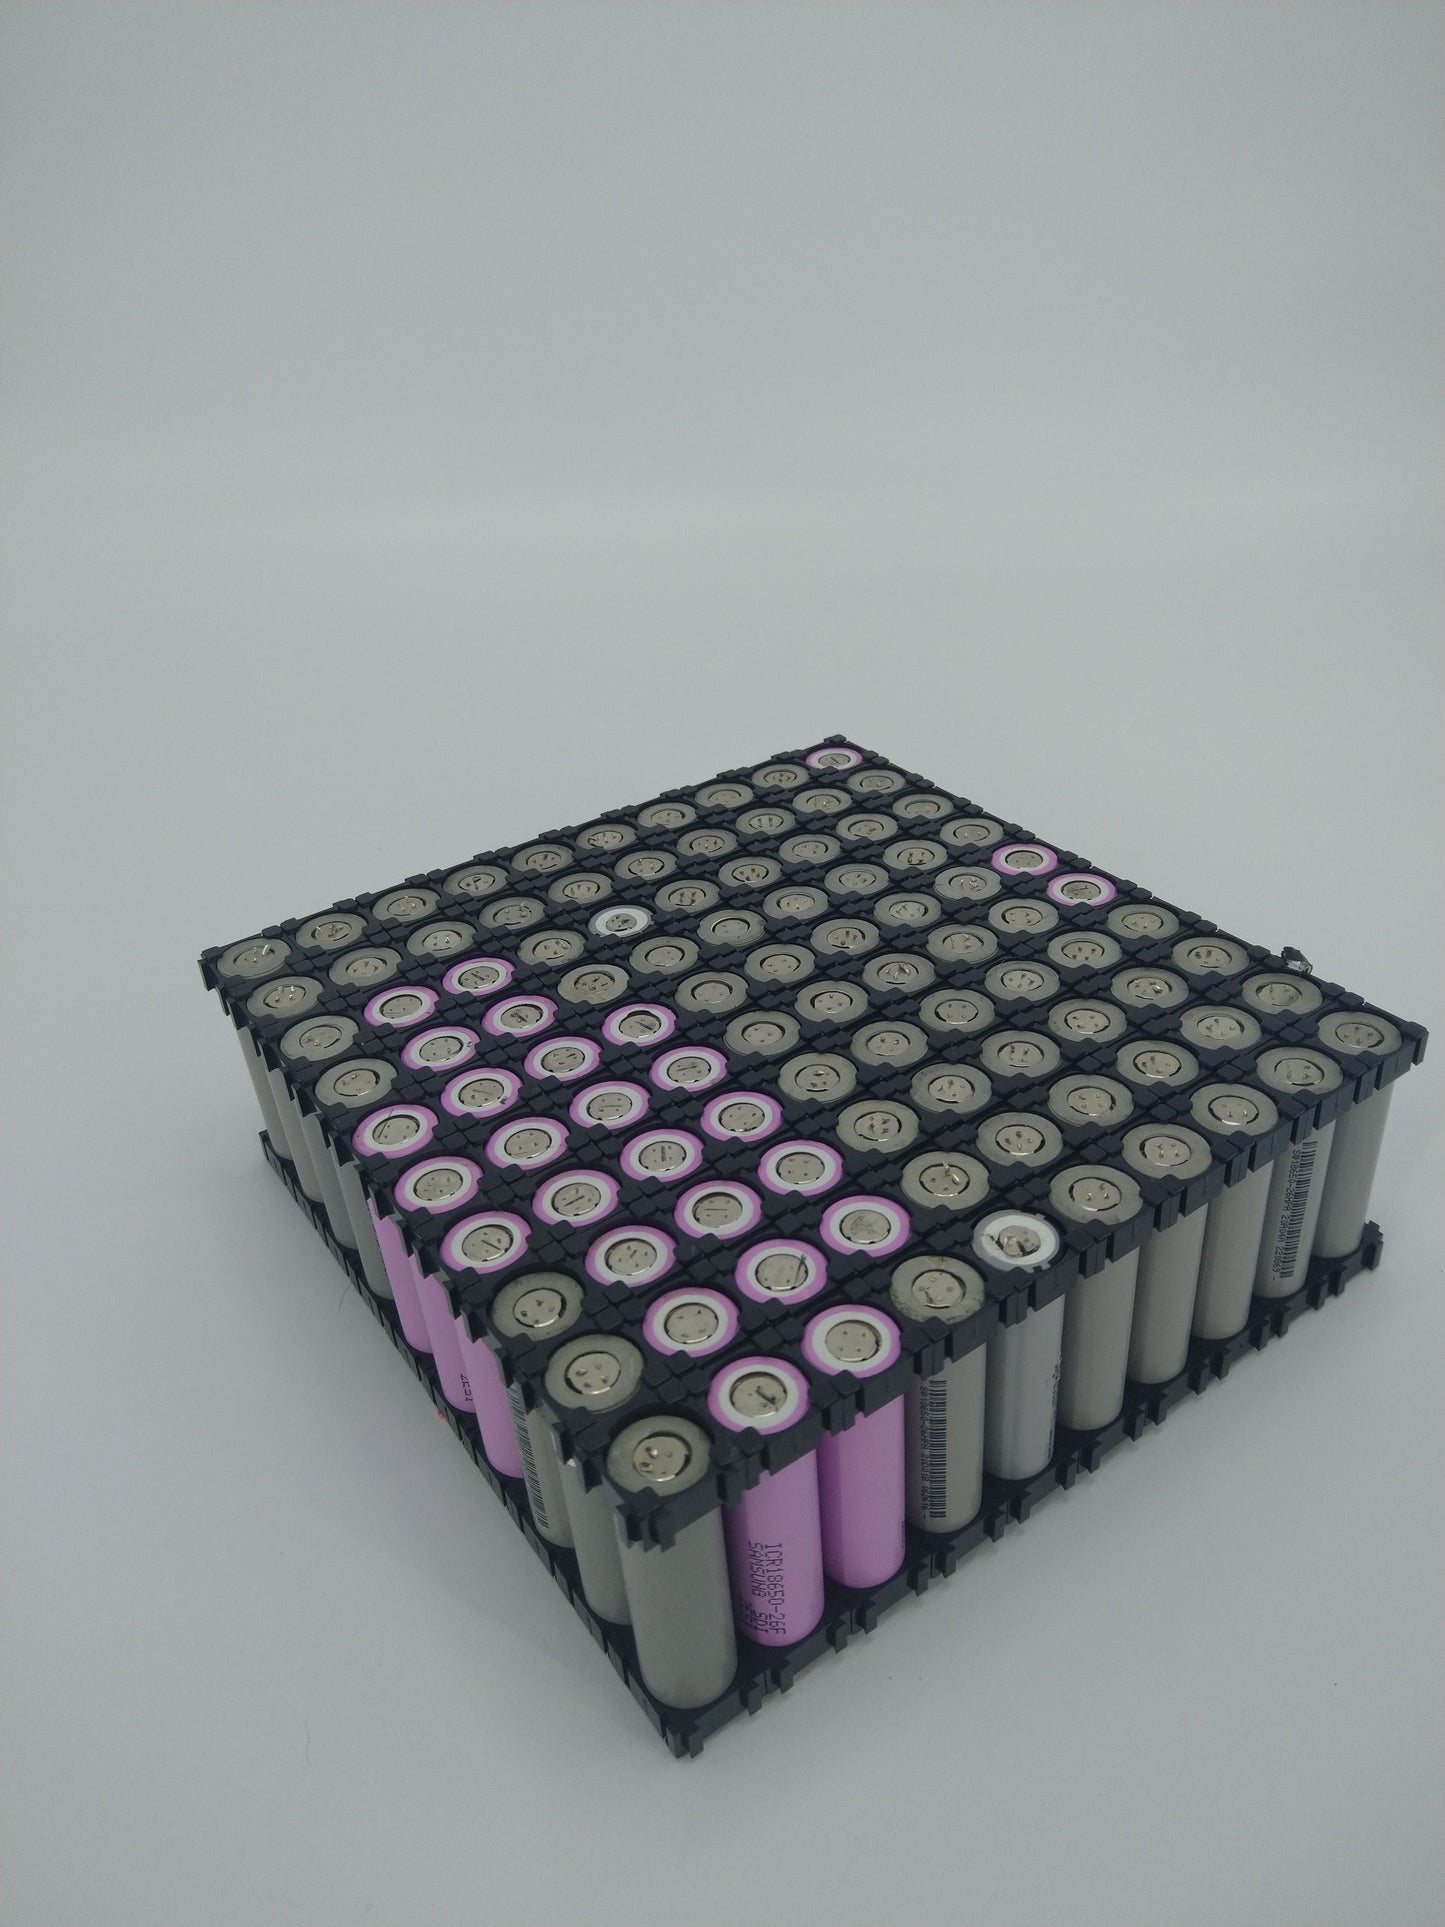 100x 18650 Cells + 200 modular cell holders